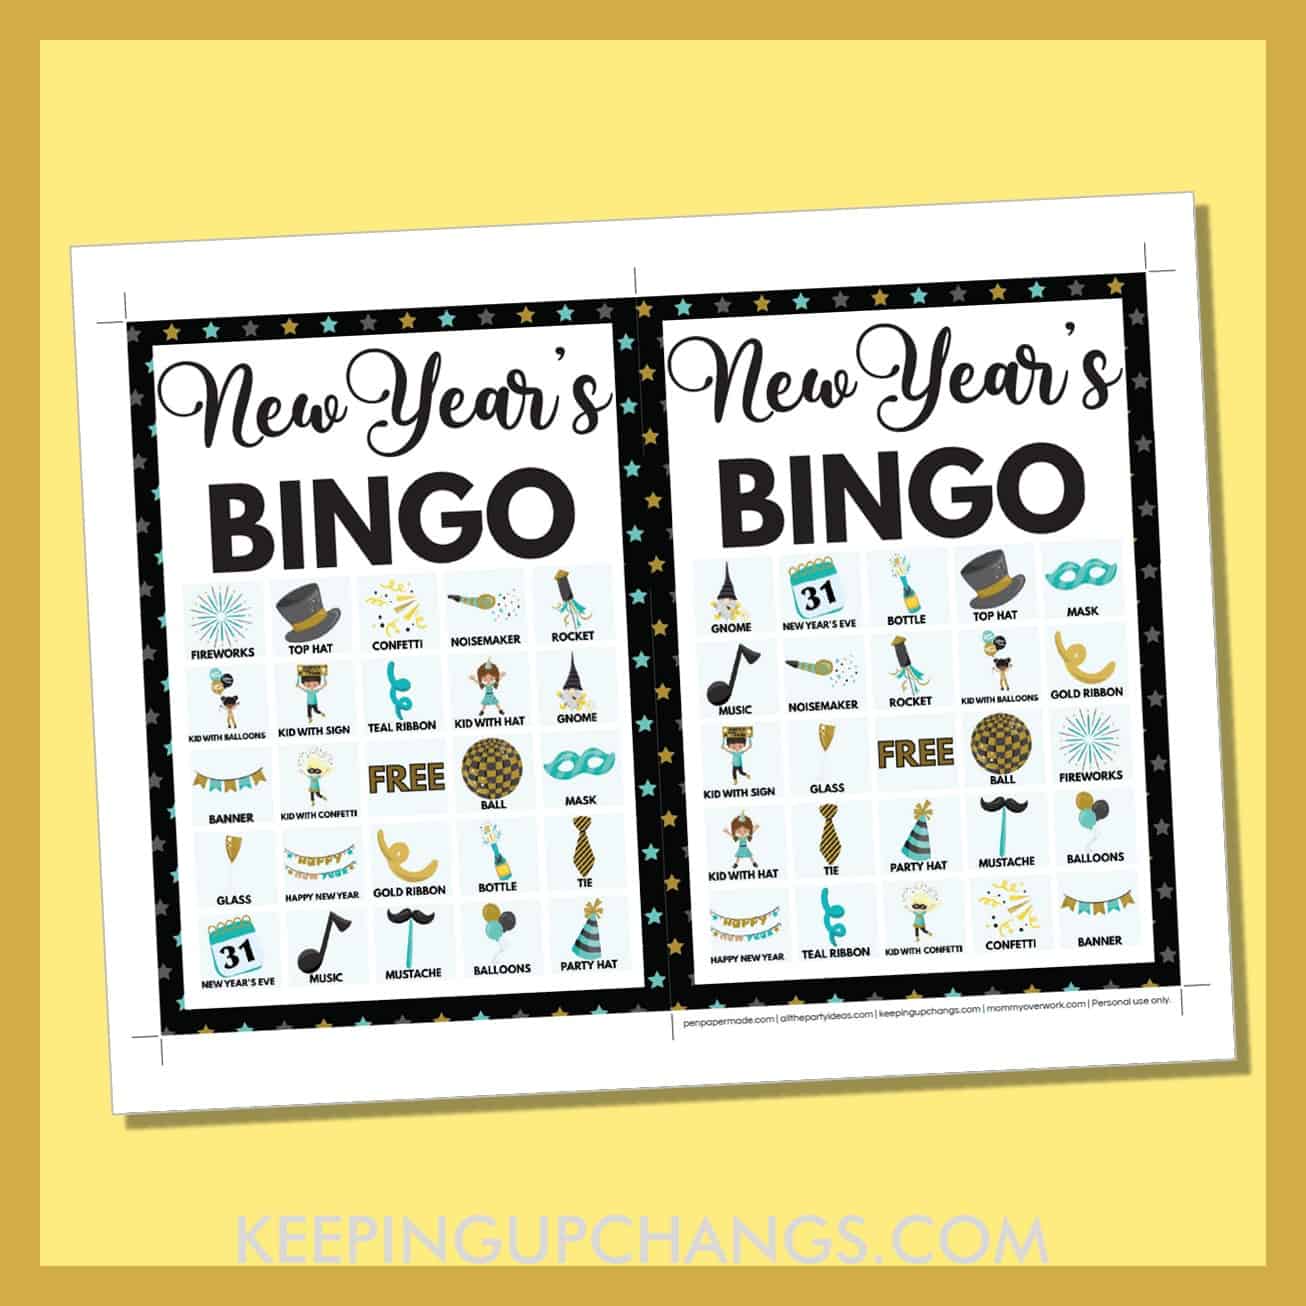 free new year's bingo card 5x5 5x7 game boards with images and text words.